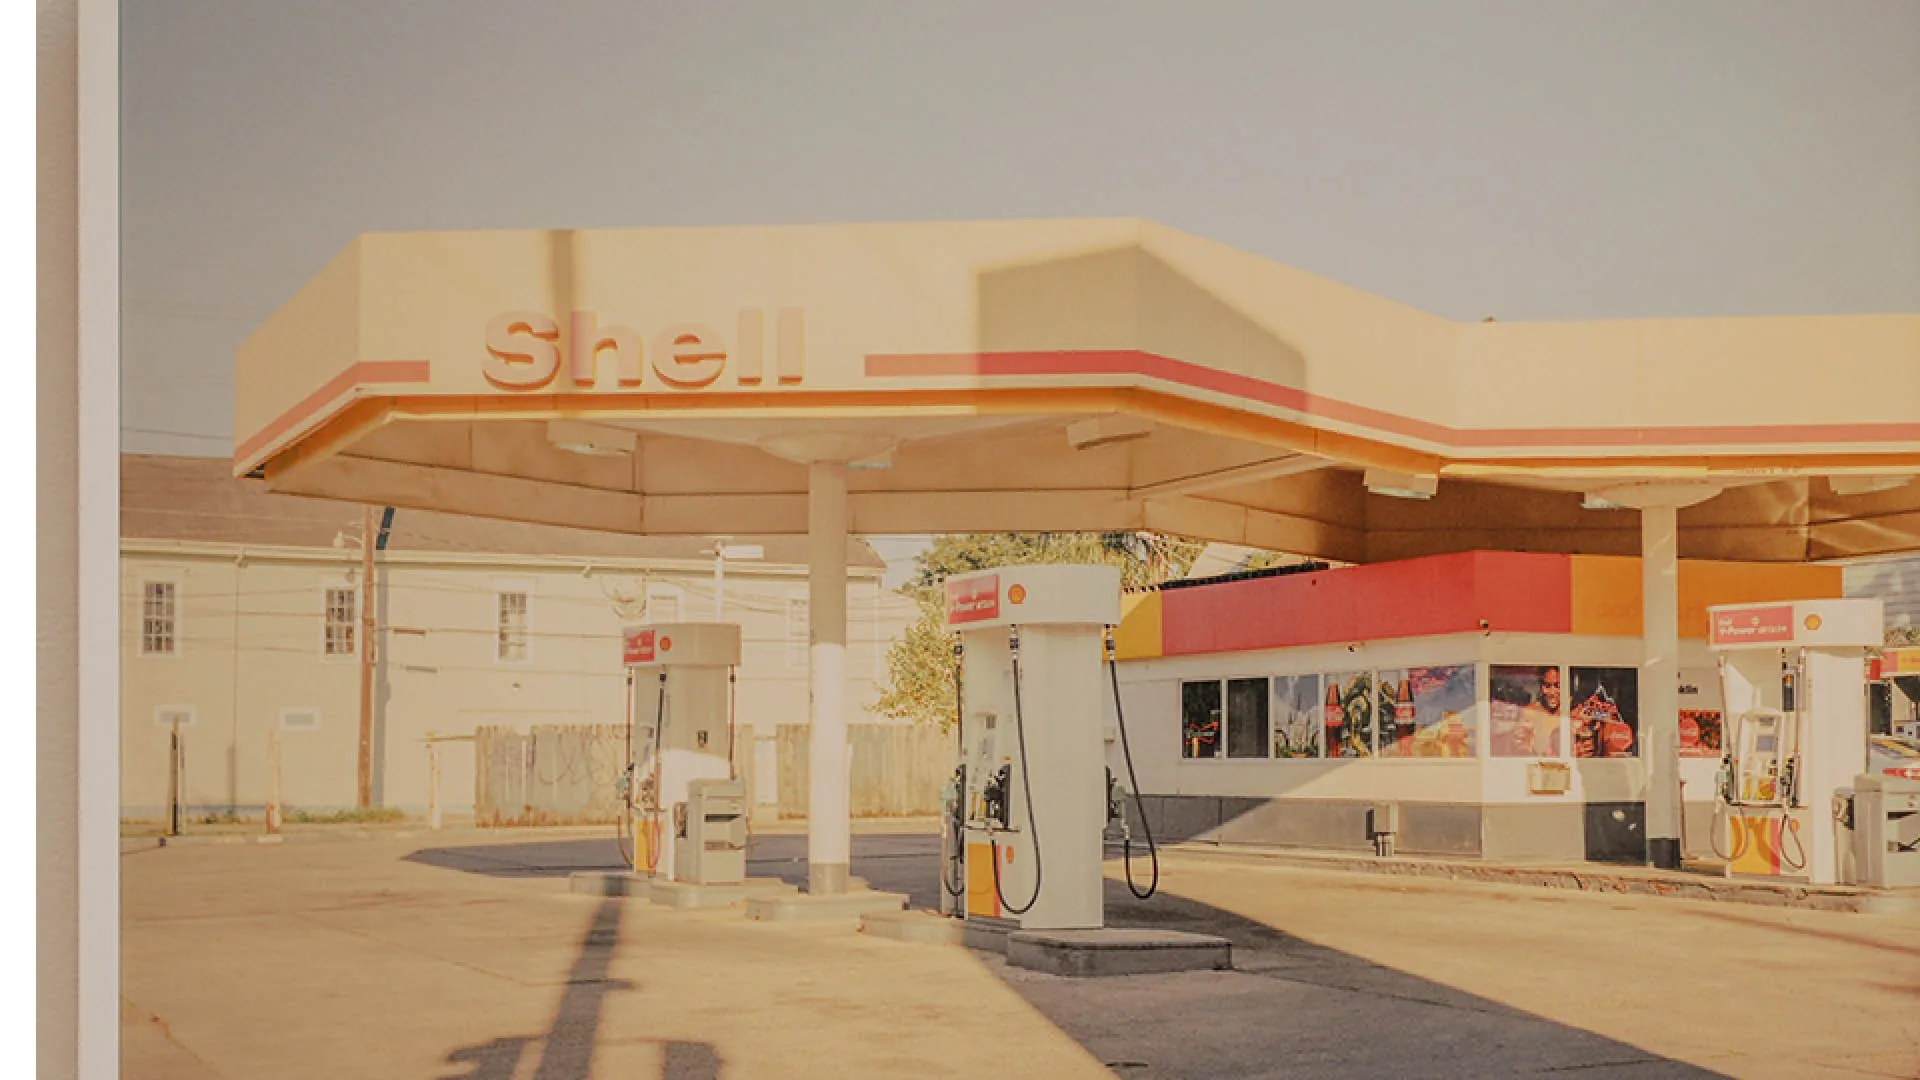 detail of photograph by Elana Bush of Shell station